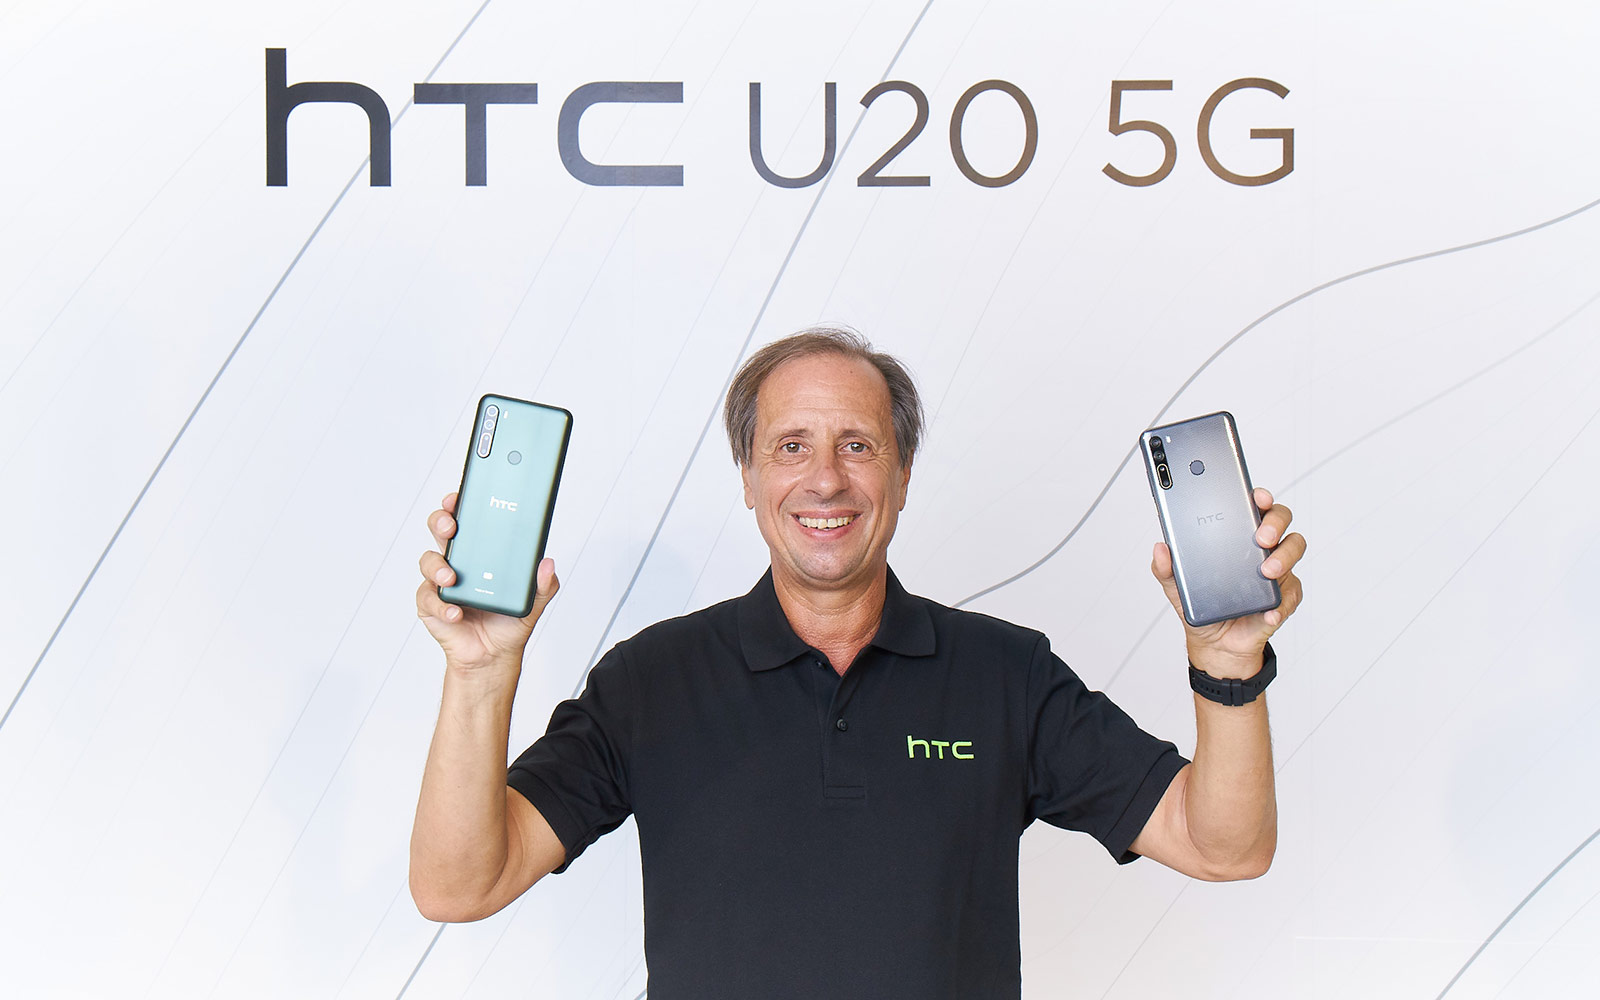 htc model at555